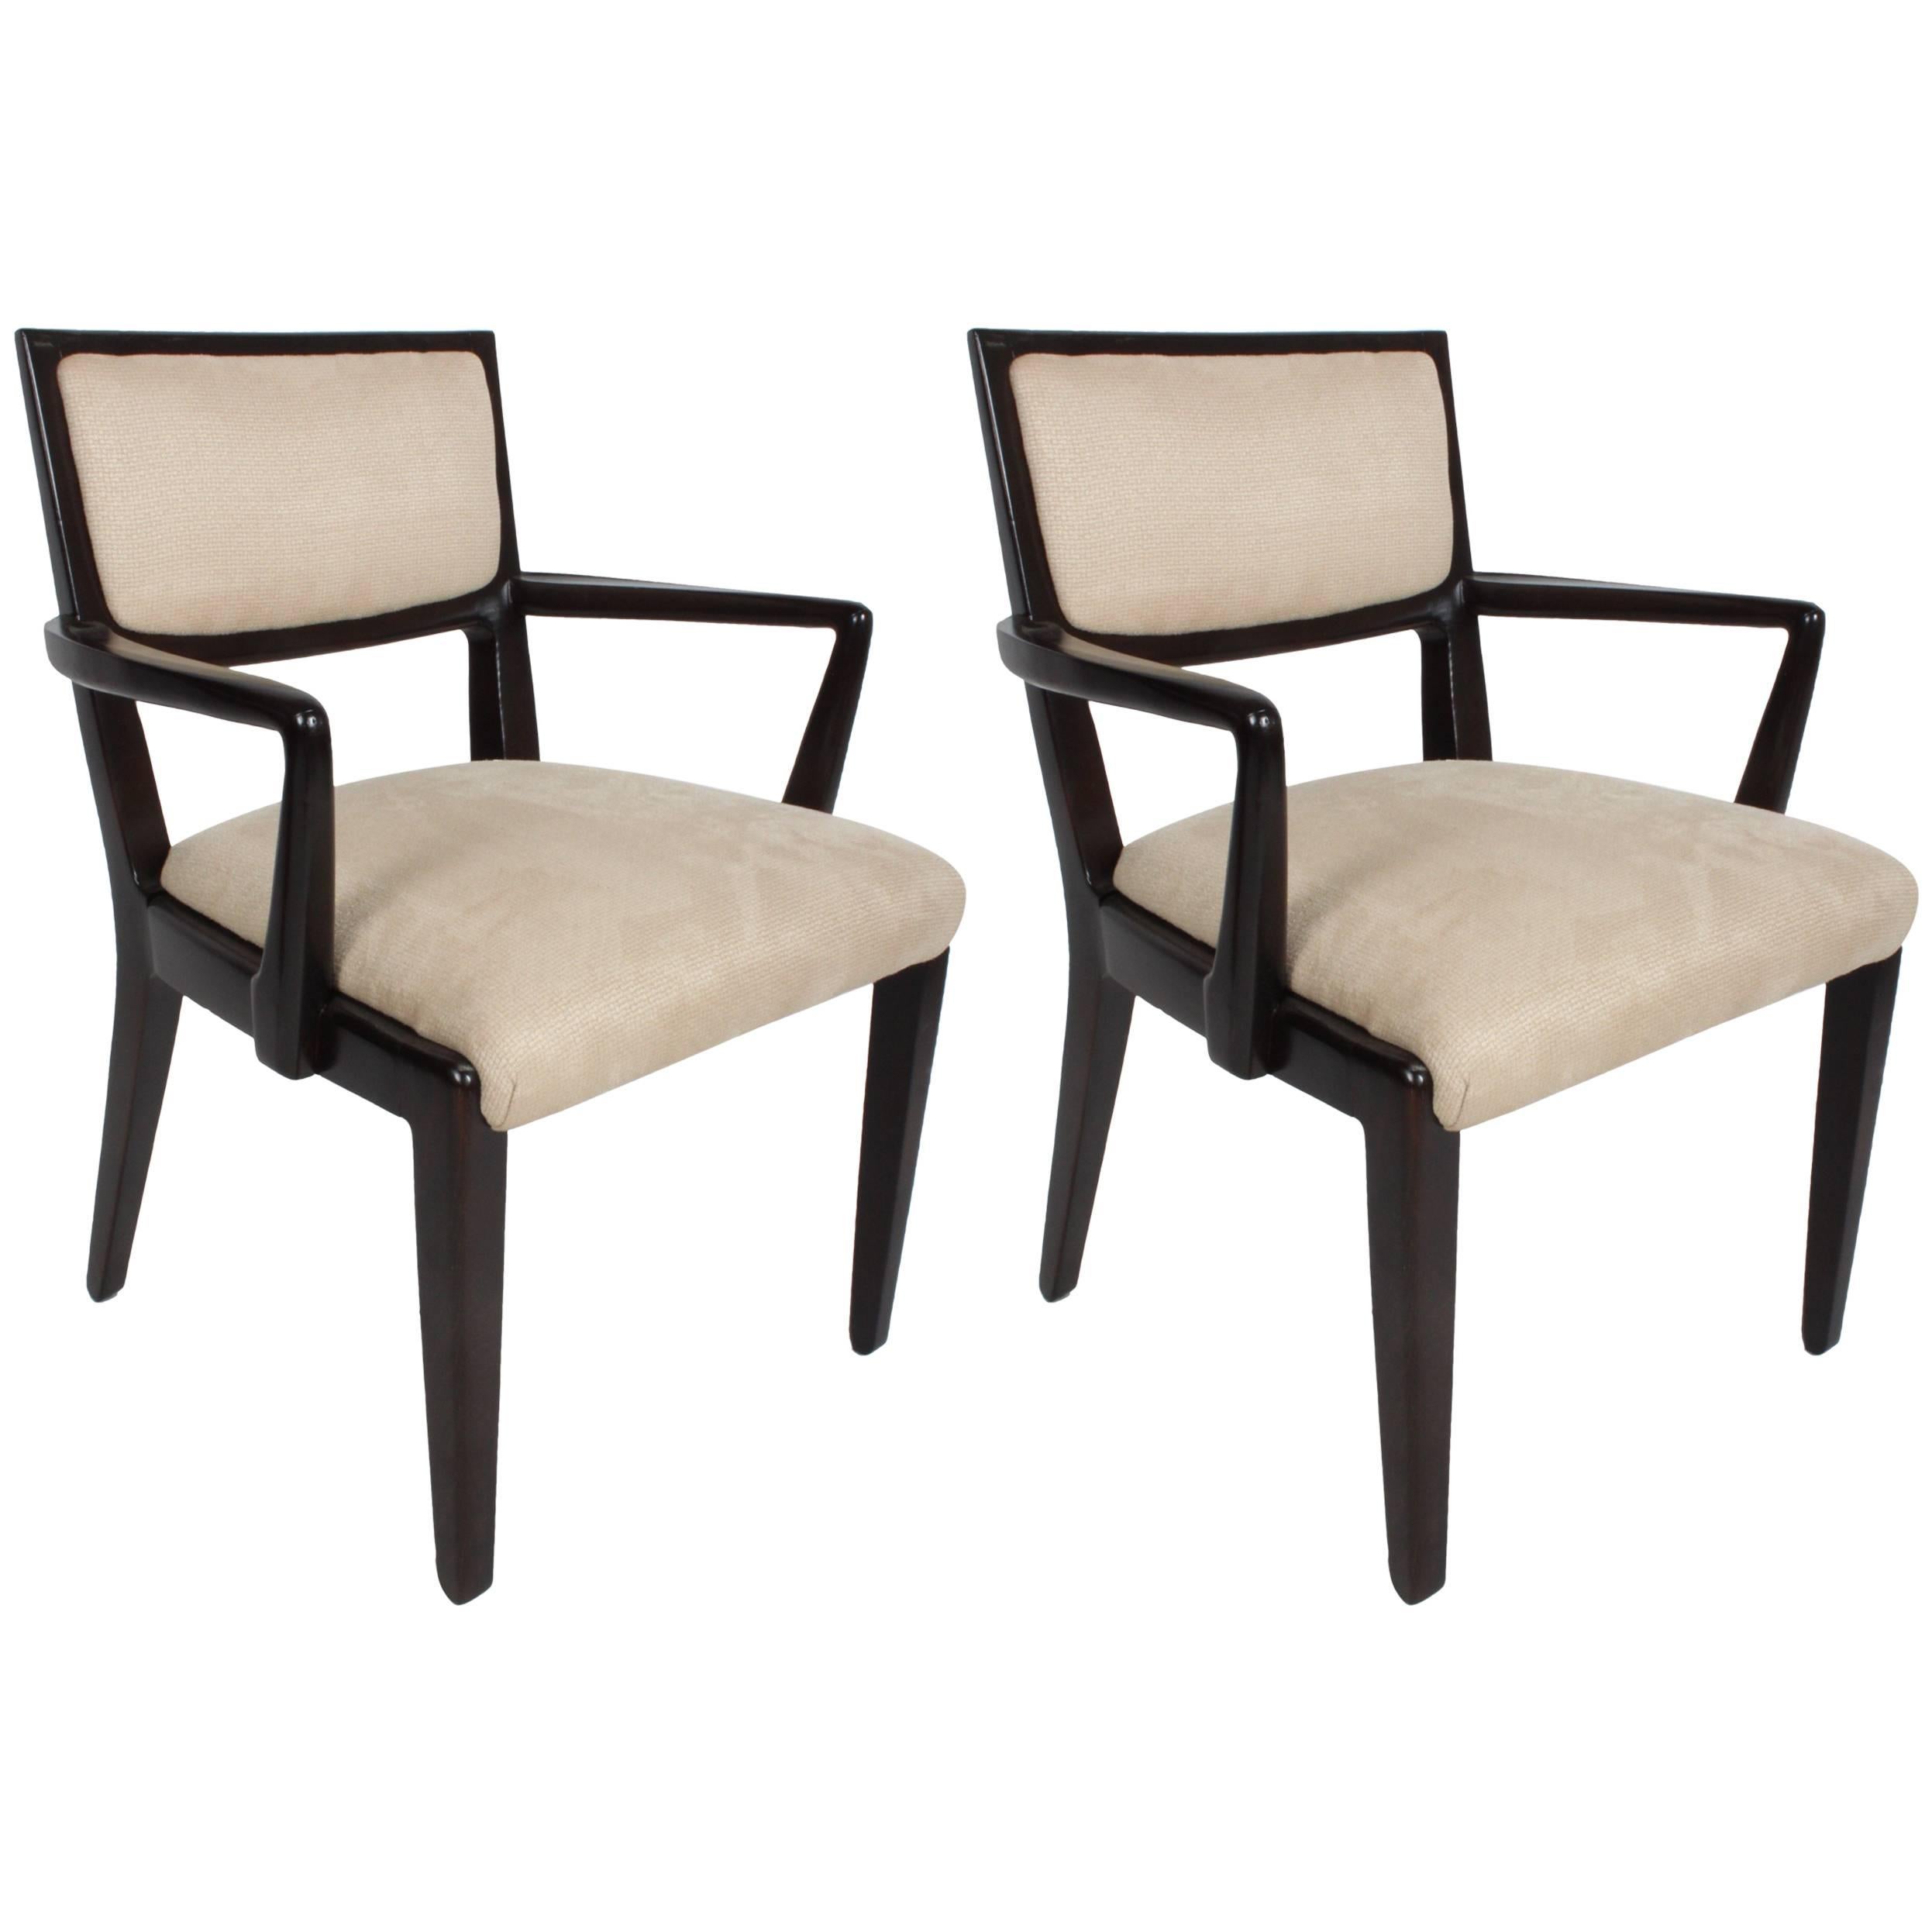 Pair of Edward Wormley for Drexel Arm Chairs - Precedent Collection 